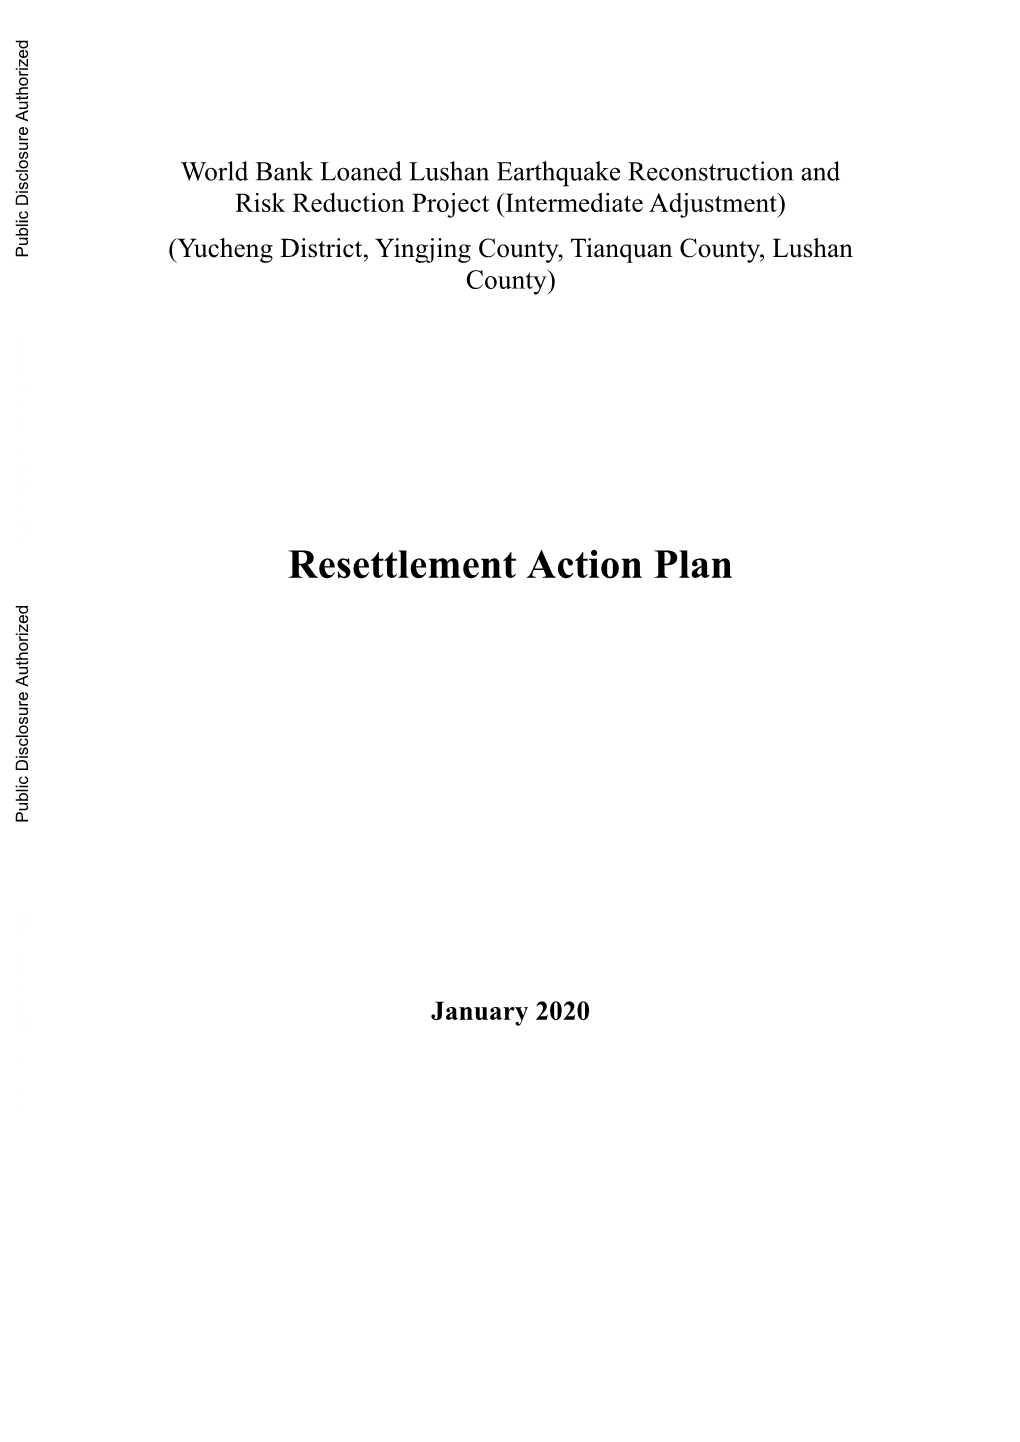 Due Diligence Report for Resettlement Which Is Attached to the Report